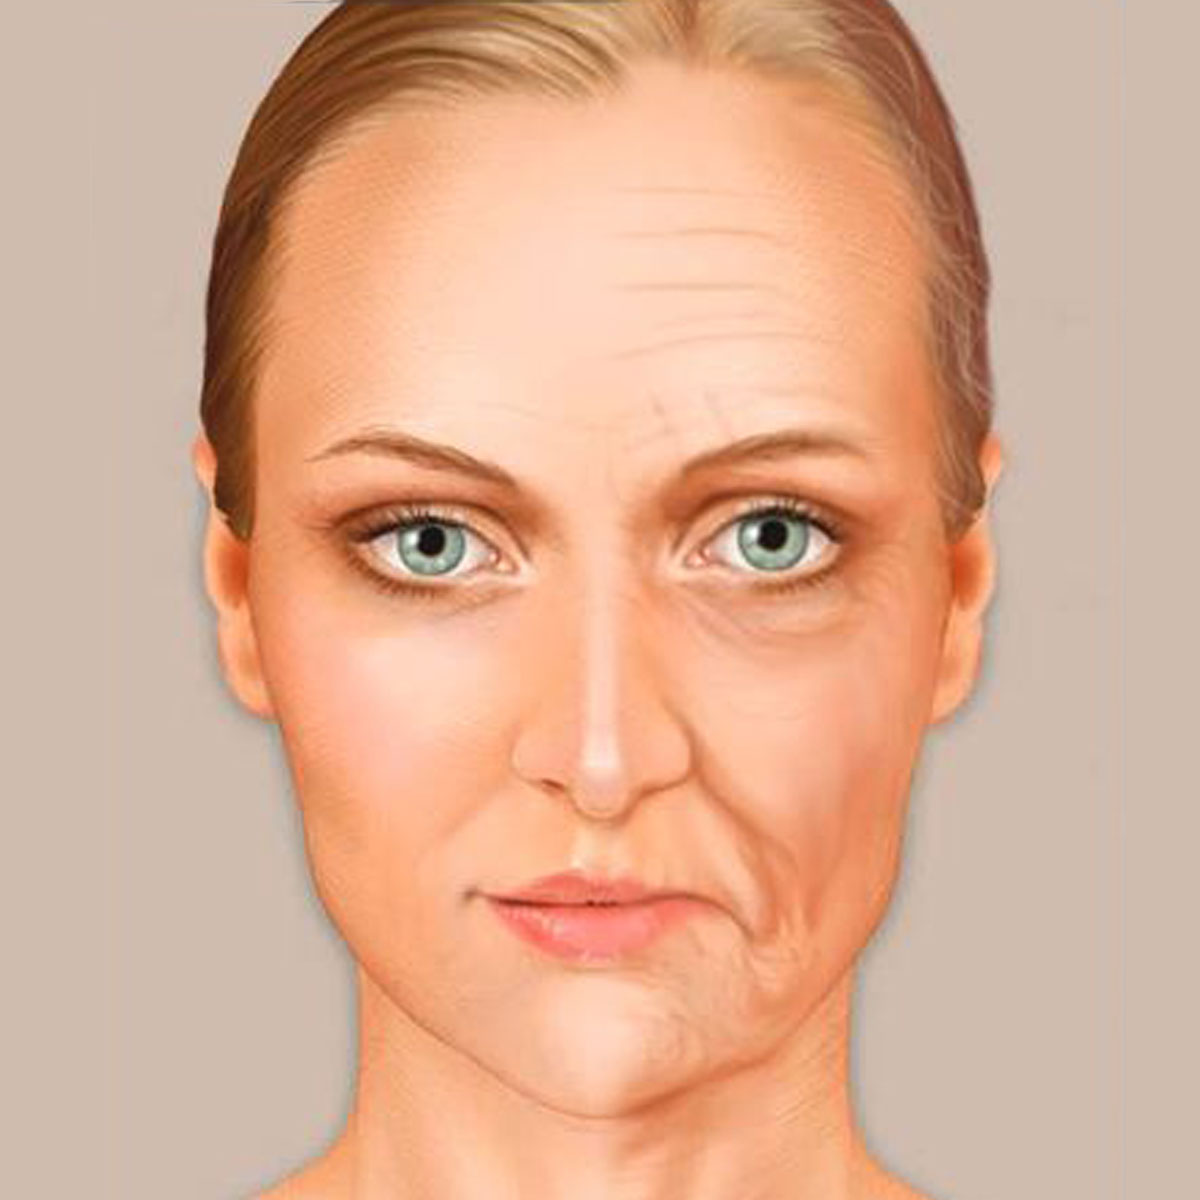 SIgns of facial aging